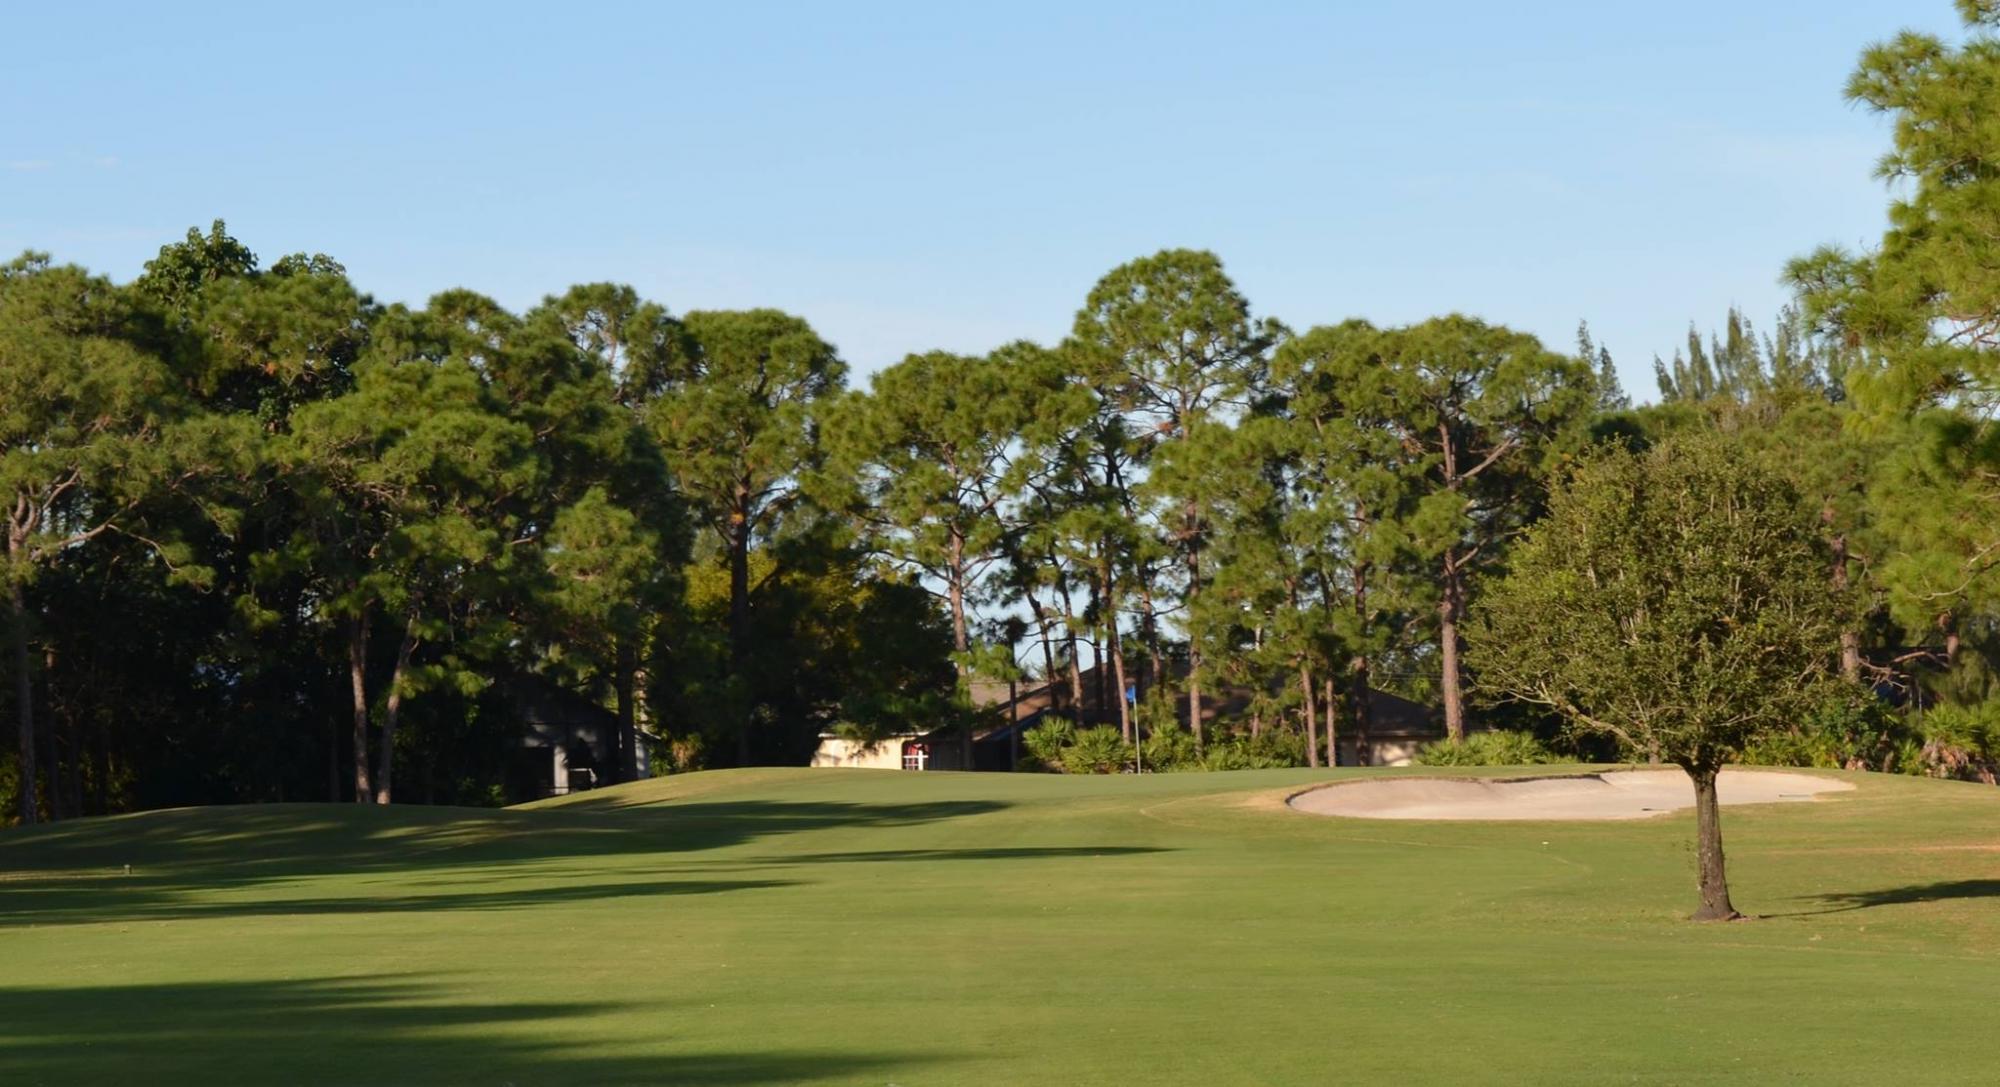 View Palmetto Golf Club's impressive golf course situated in dazzling South Carolina.